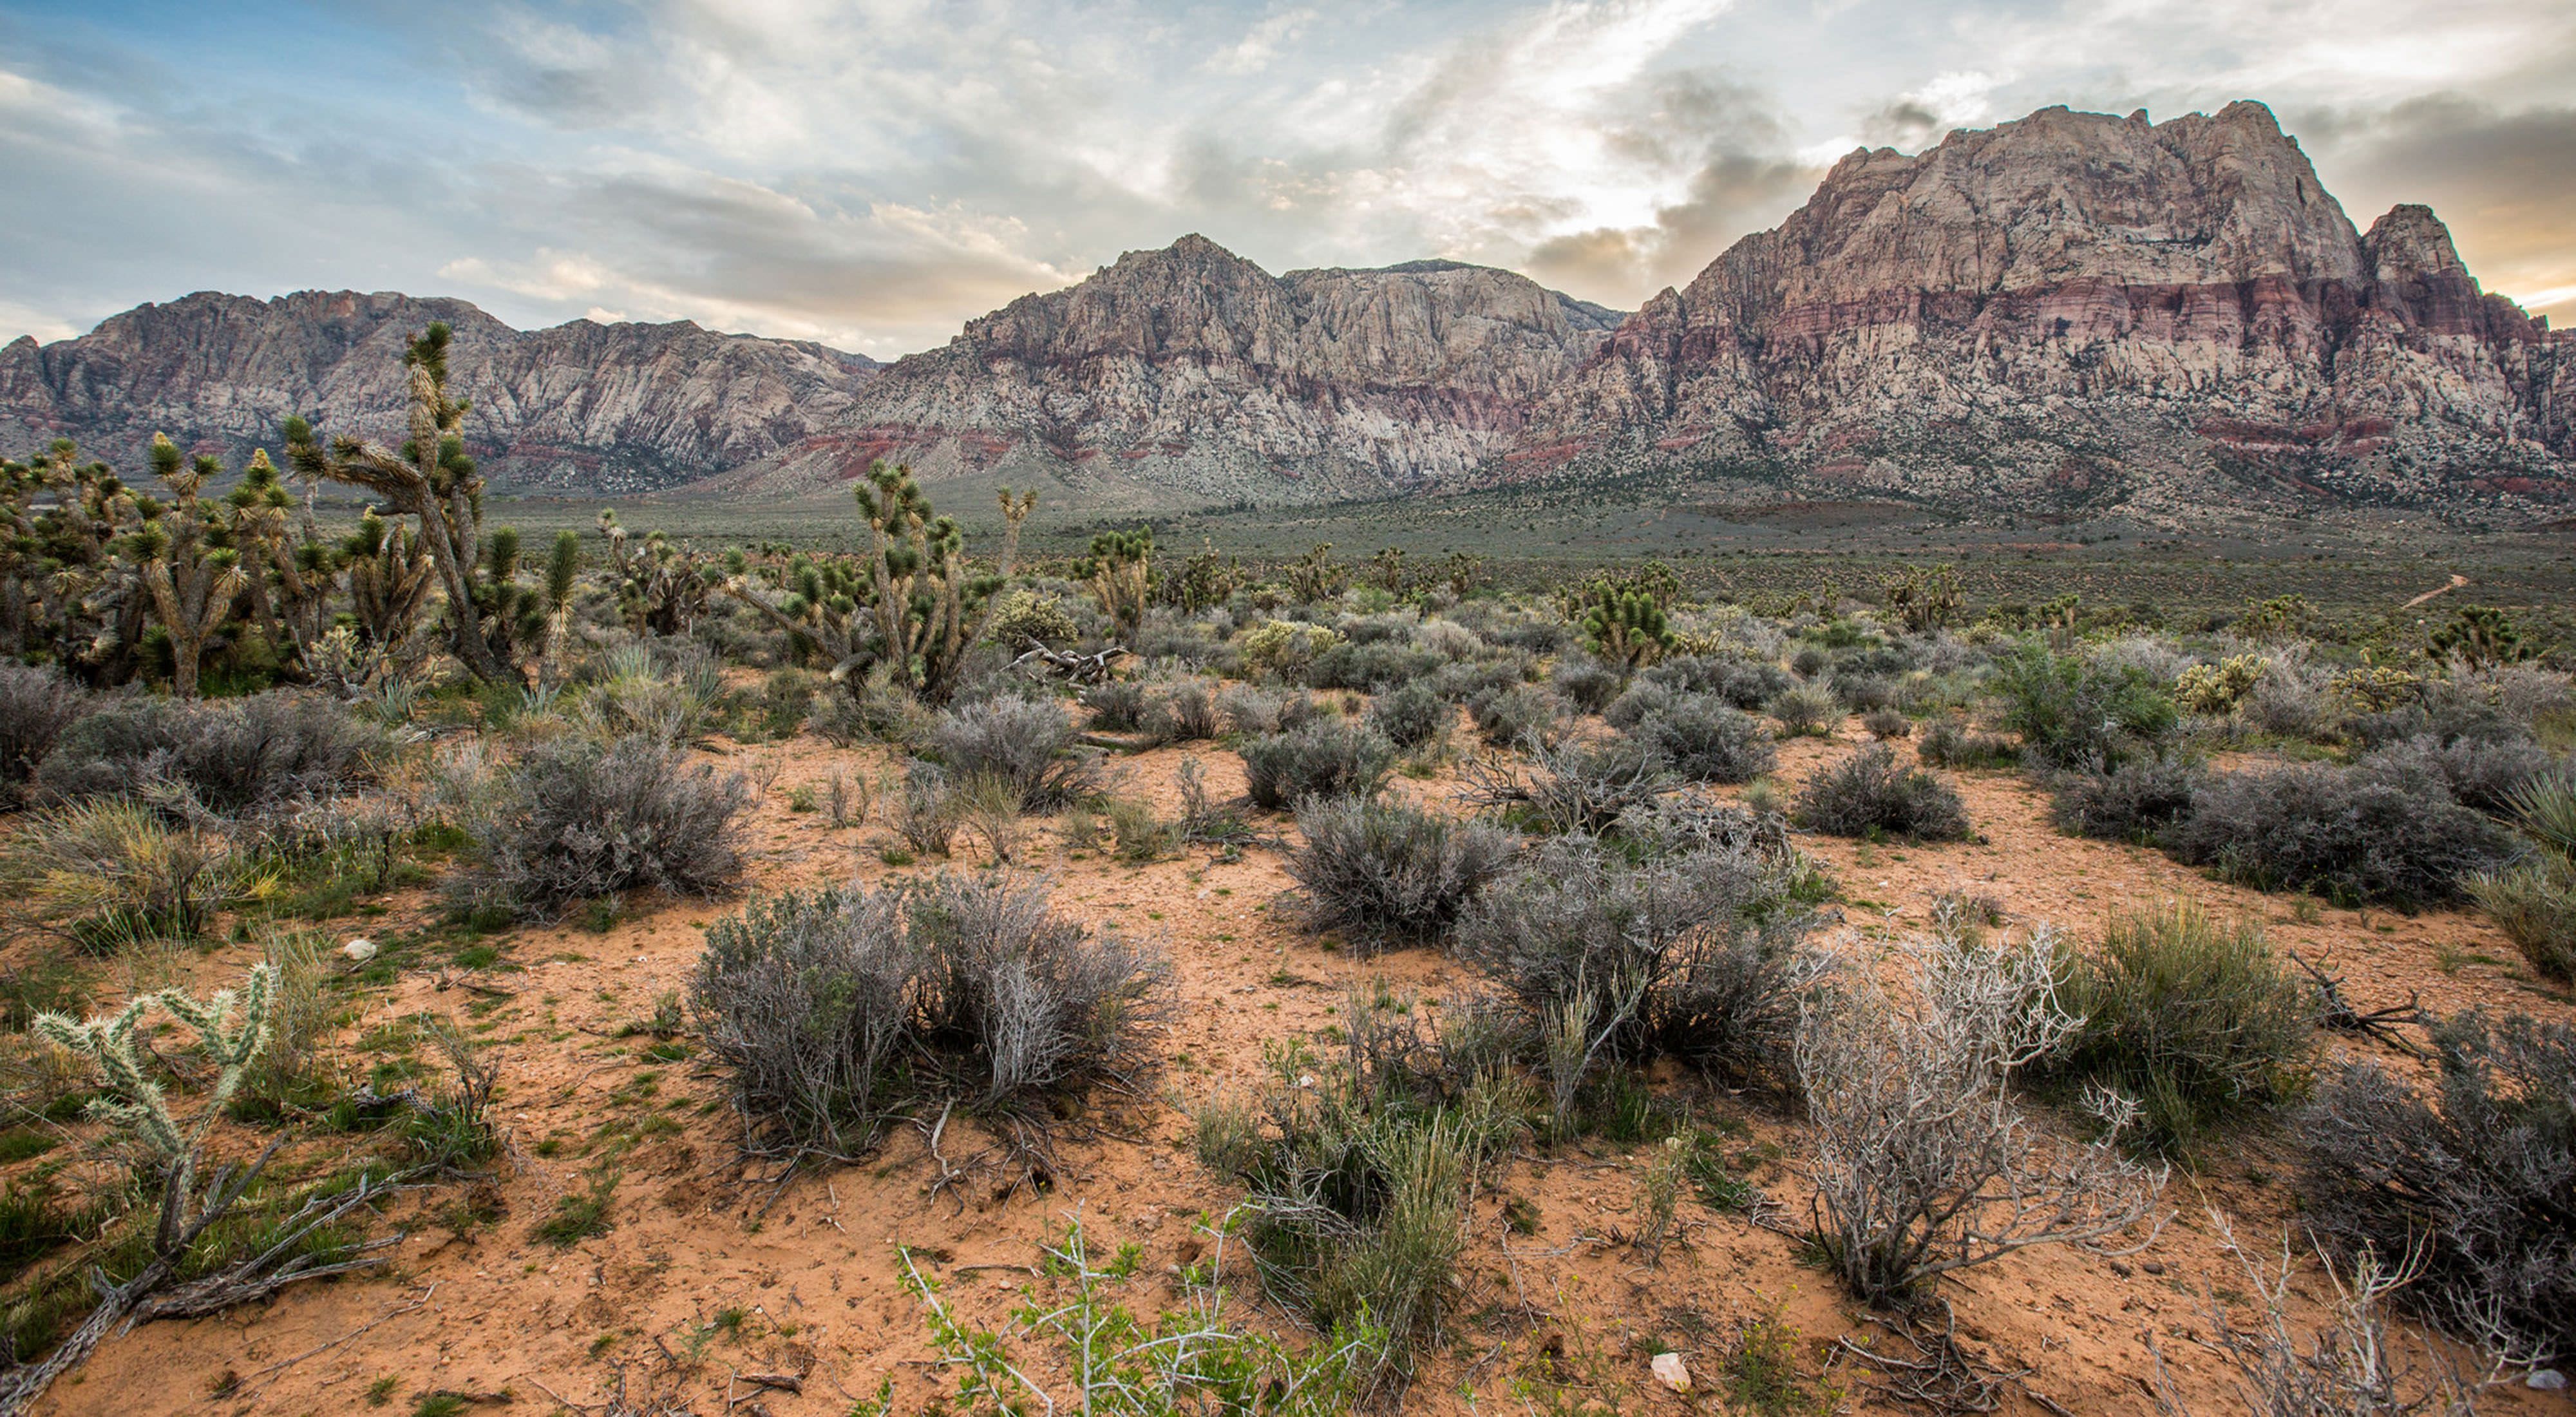 Towering red rock mountains in the background with a desert landscape in the foreground.